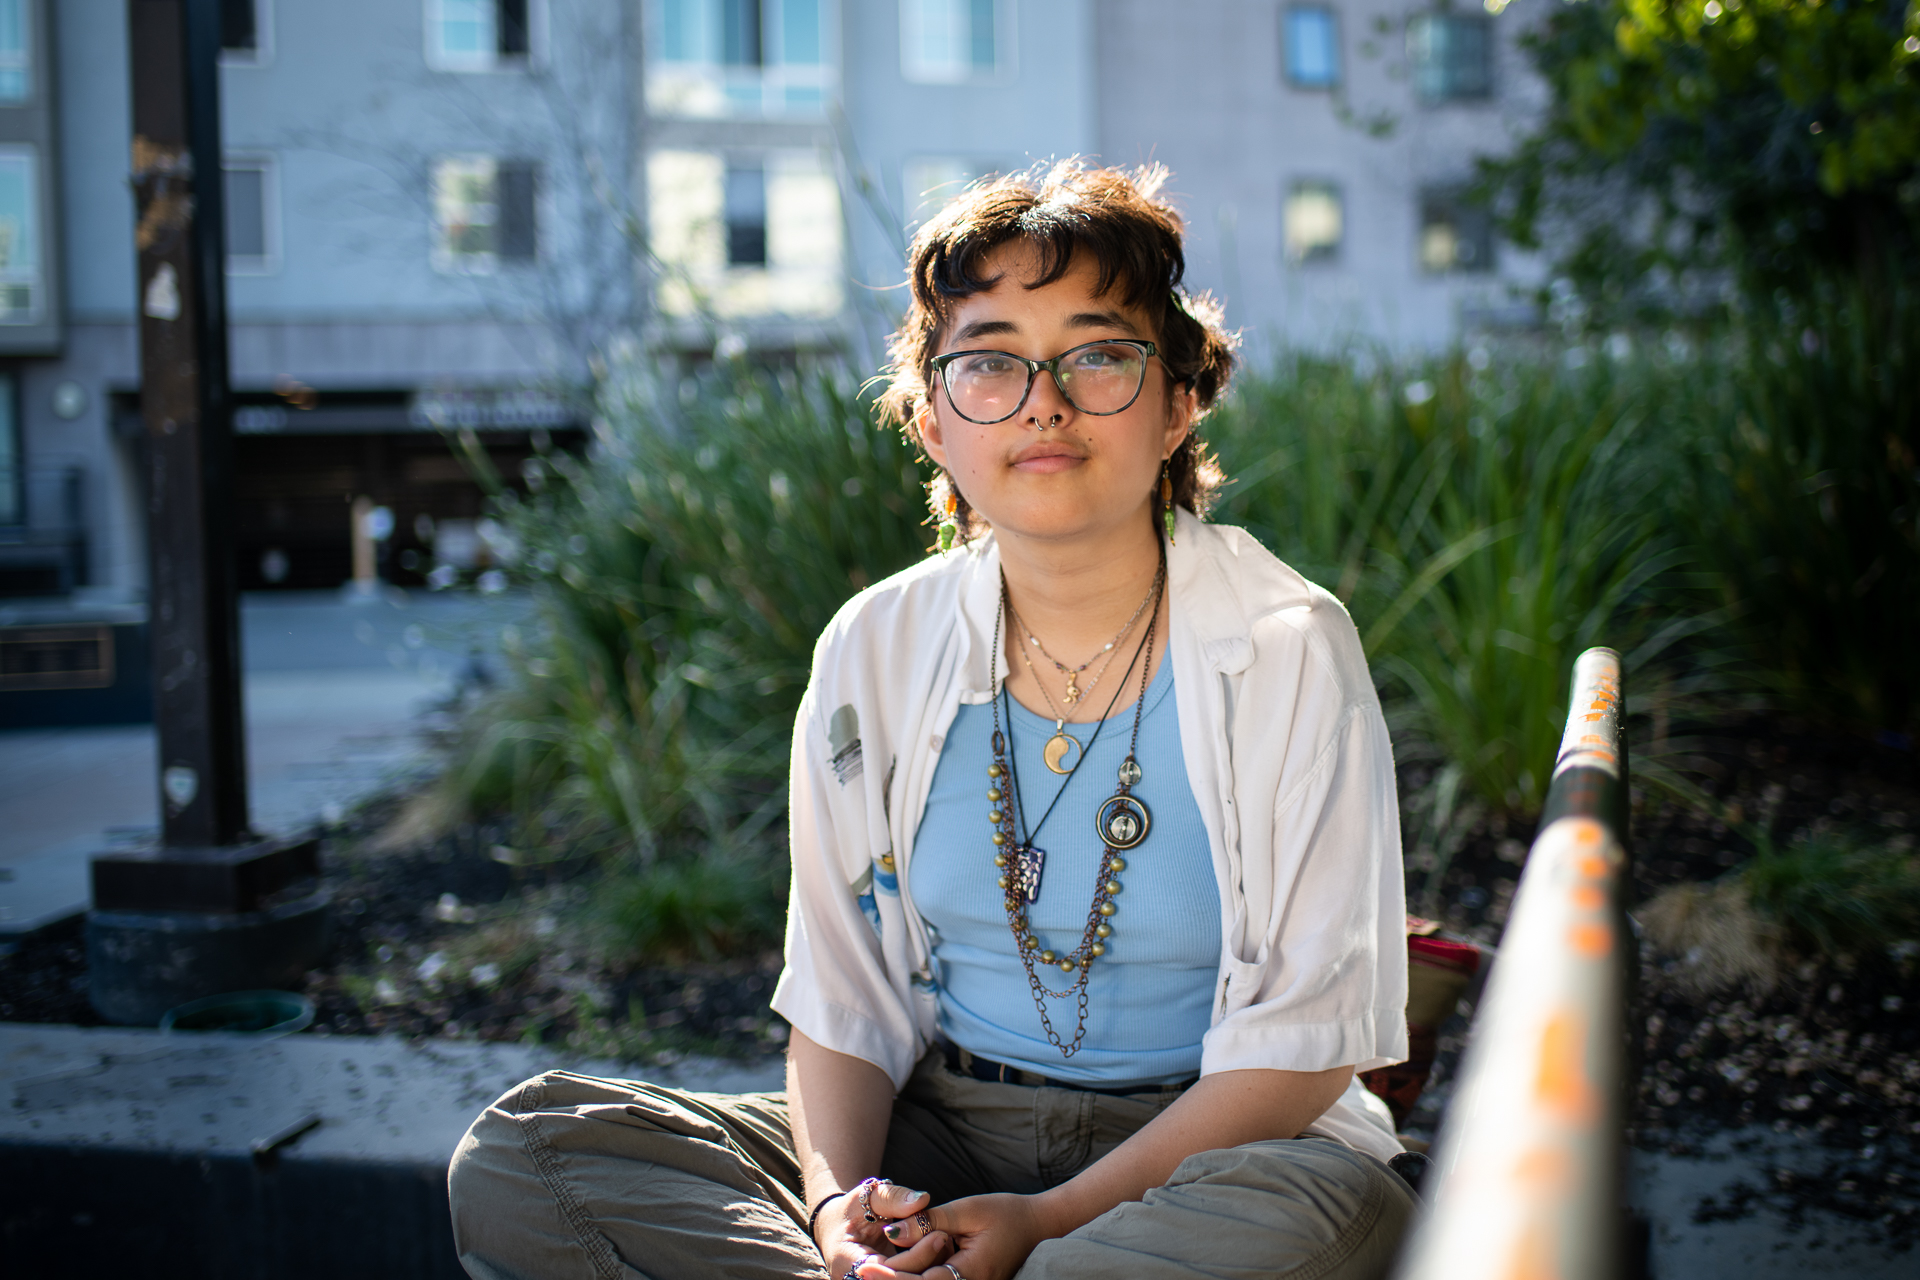 a young woman with short hair and glasses in a blue shirt sits cross-legged in a park